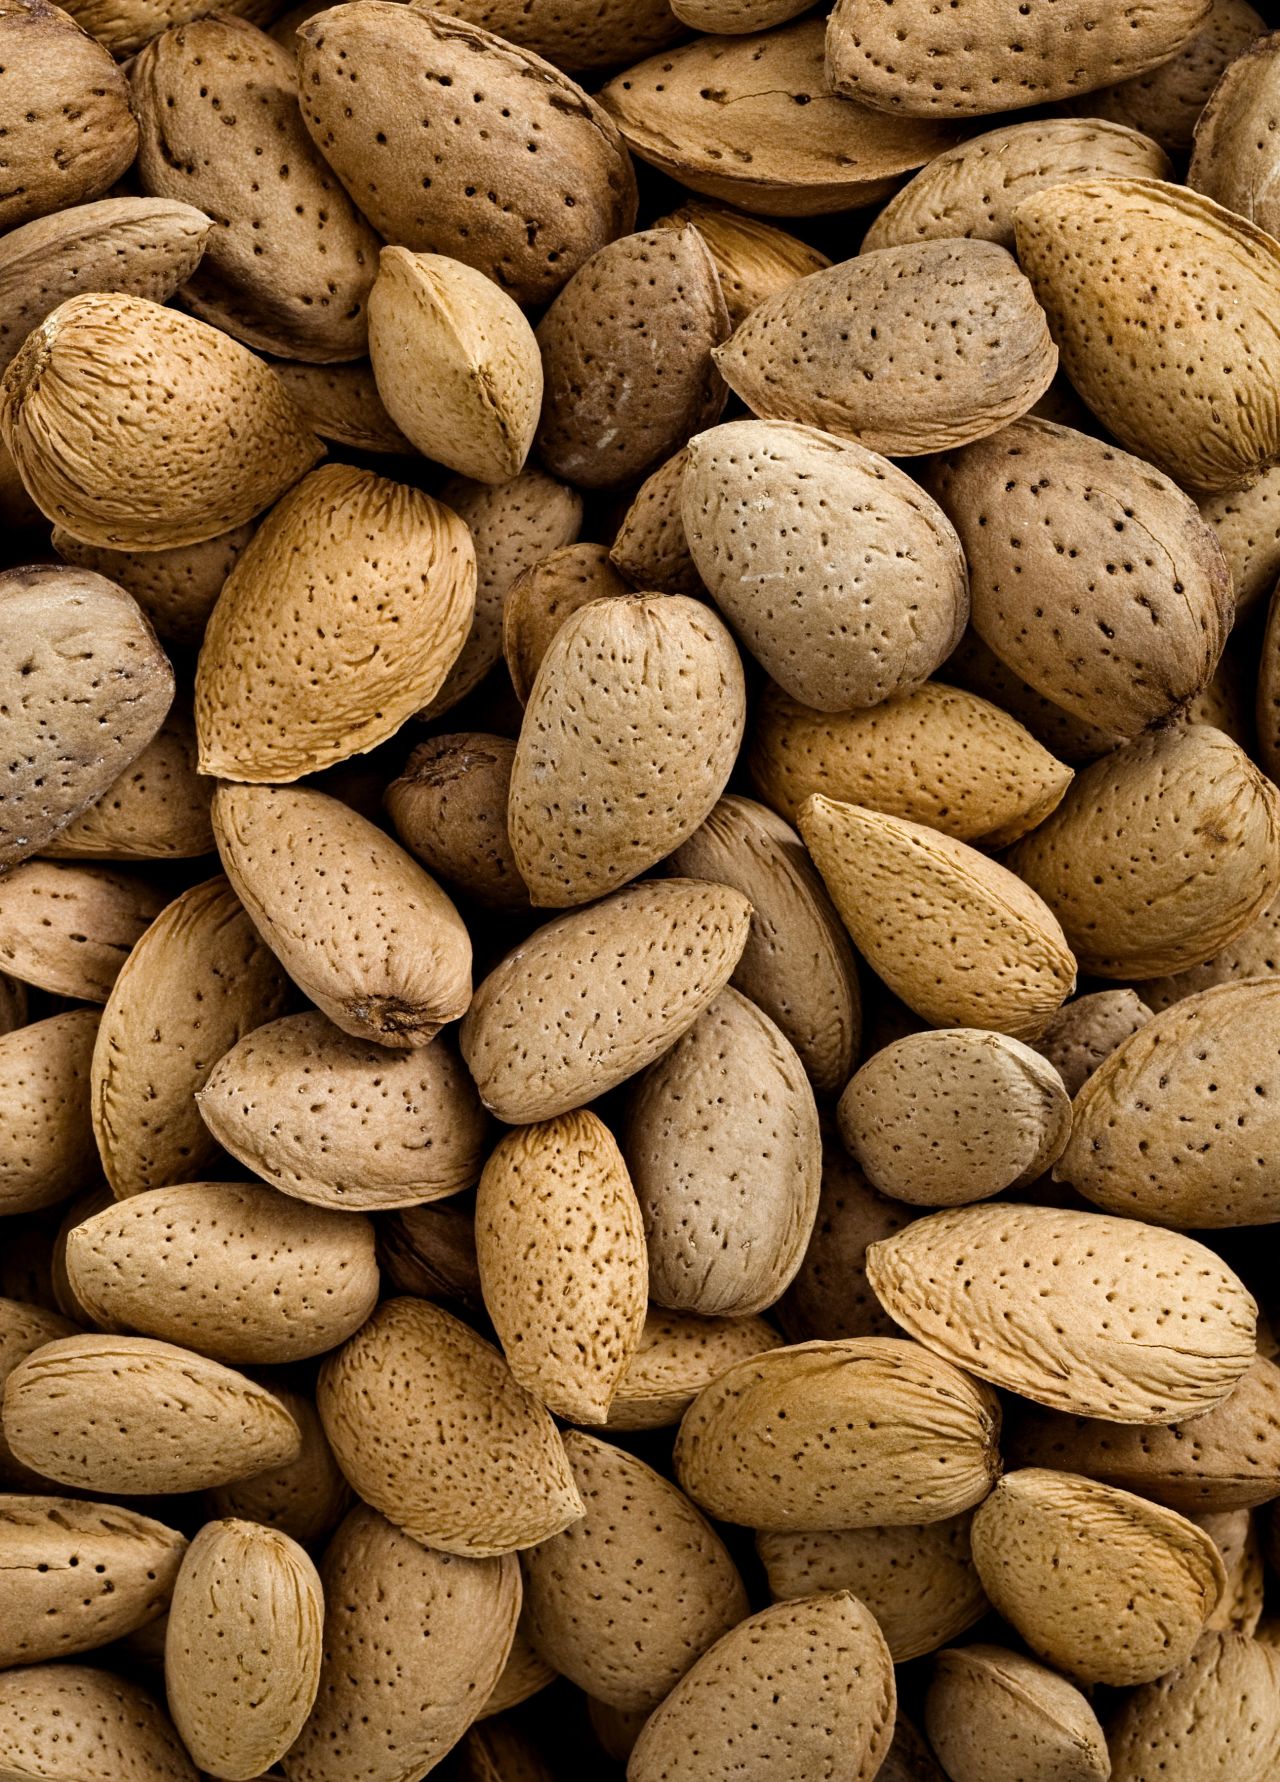 Tree nuts such as almonds, pictured, walnuts and pecans are a frequent source of allergic reactions. Even a trace amount can be dangerous to some individuals.